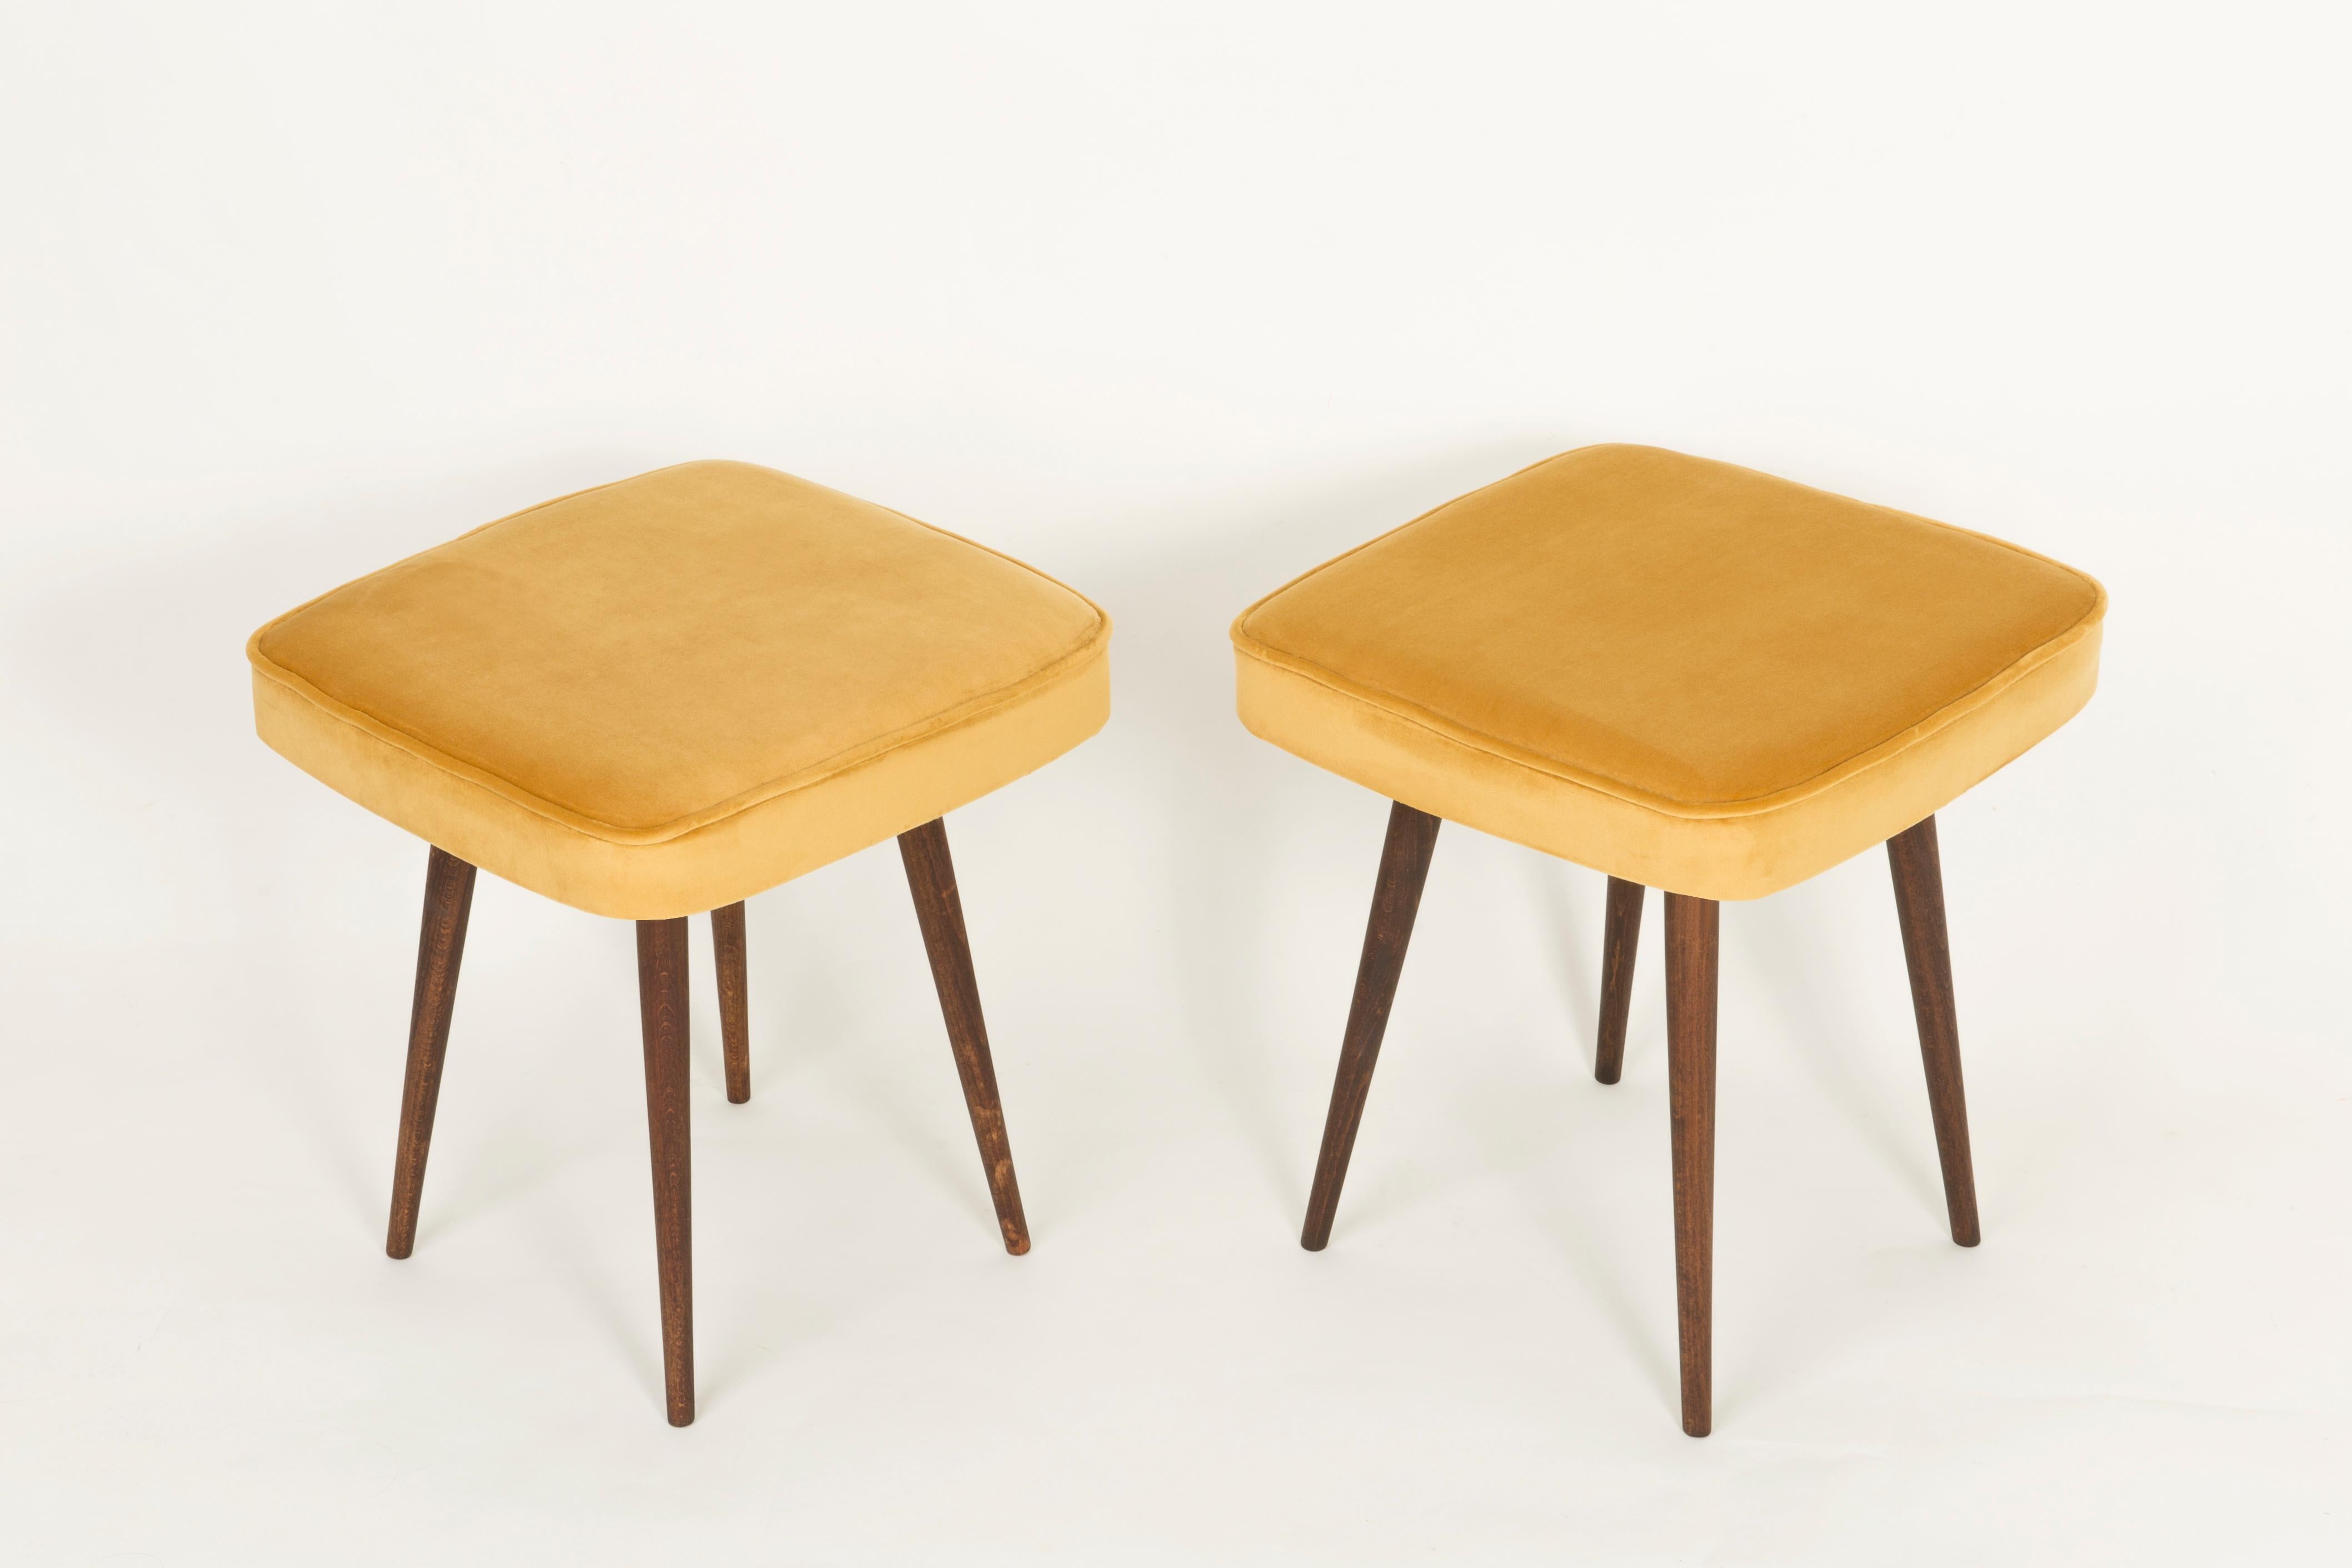 Stools from the turn of the 1960s and 1970s. Beautiful mustard velor upholstery. The stools consists of an upholstered part, a seat and wooden legs narrowing downwards, characteristic of the 1960s style. We can prepare this pair also in another